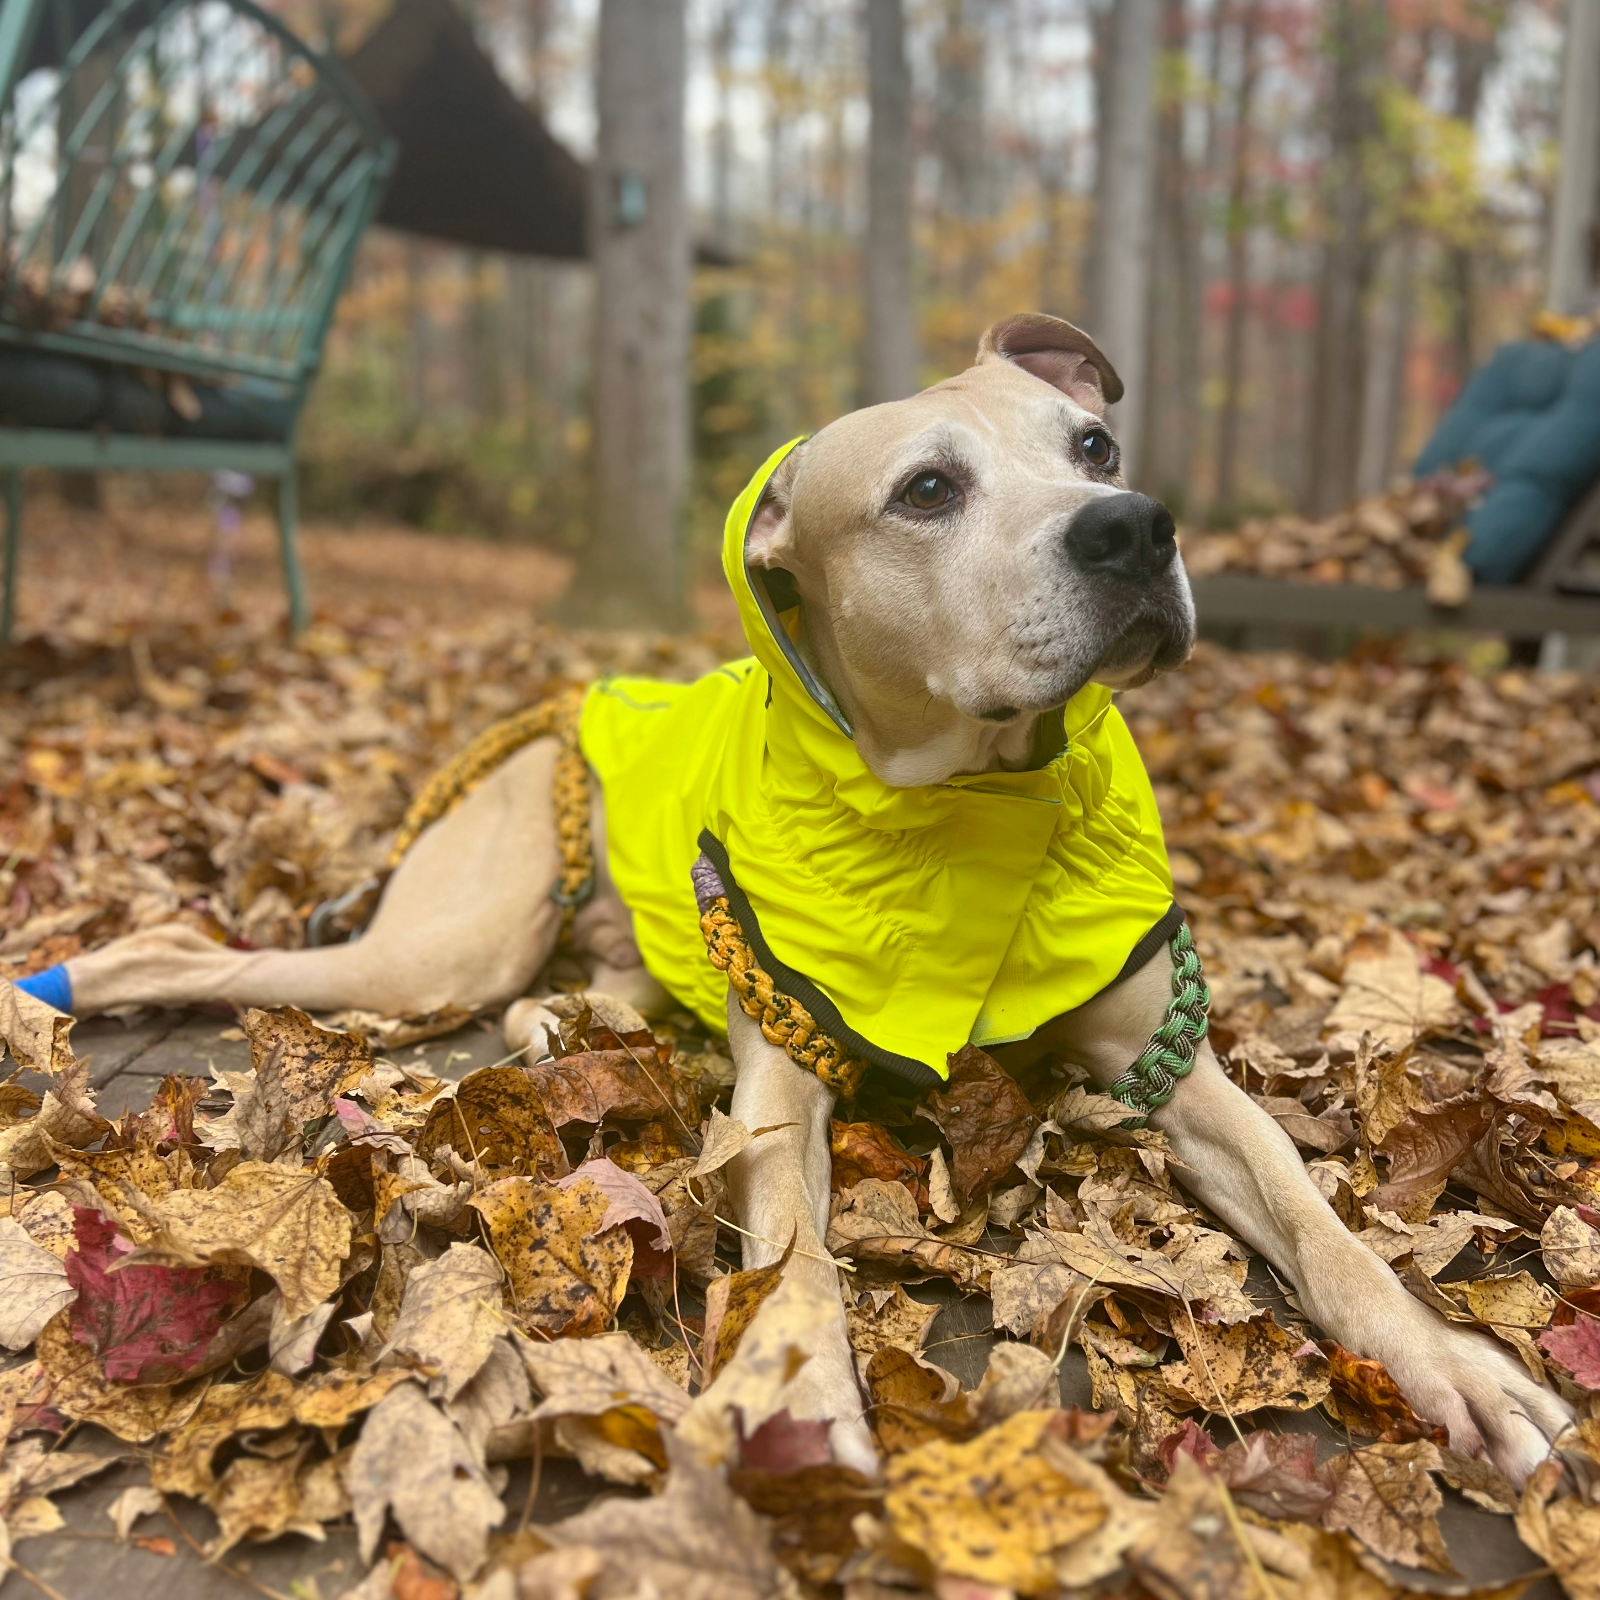 A golden pit bull type dog laying in fallen leaves wearing a rope harness and neon yellow raincoat